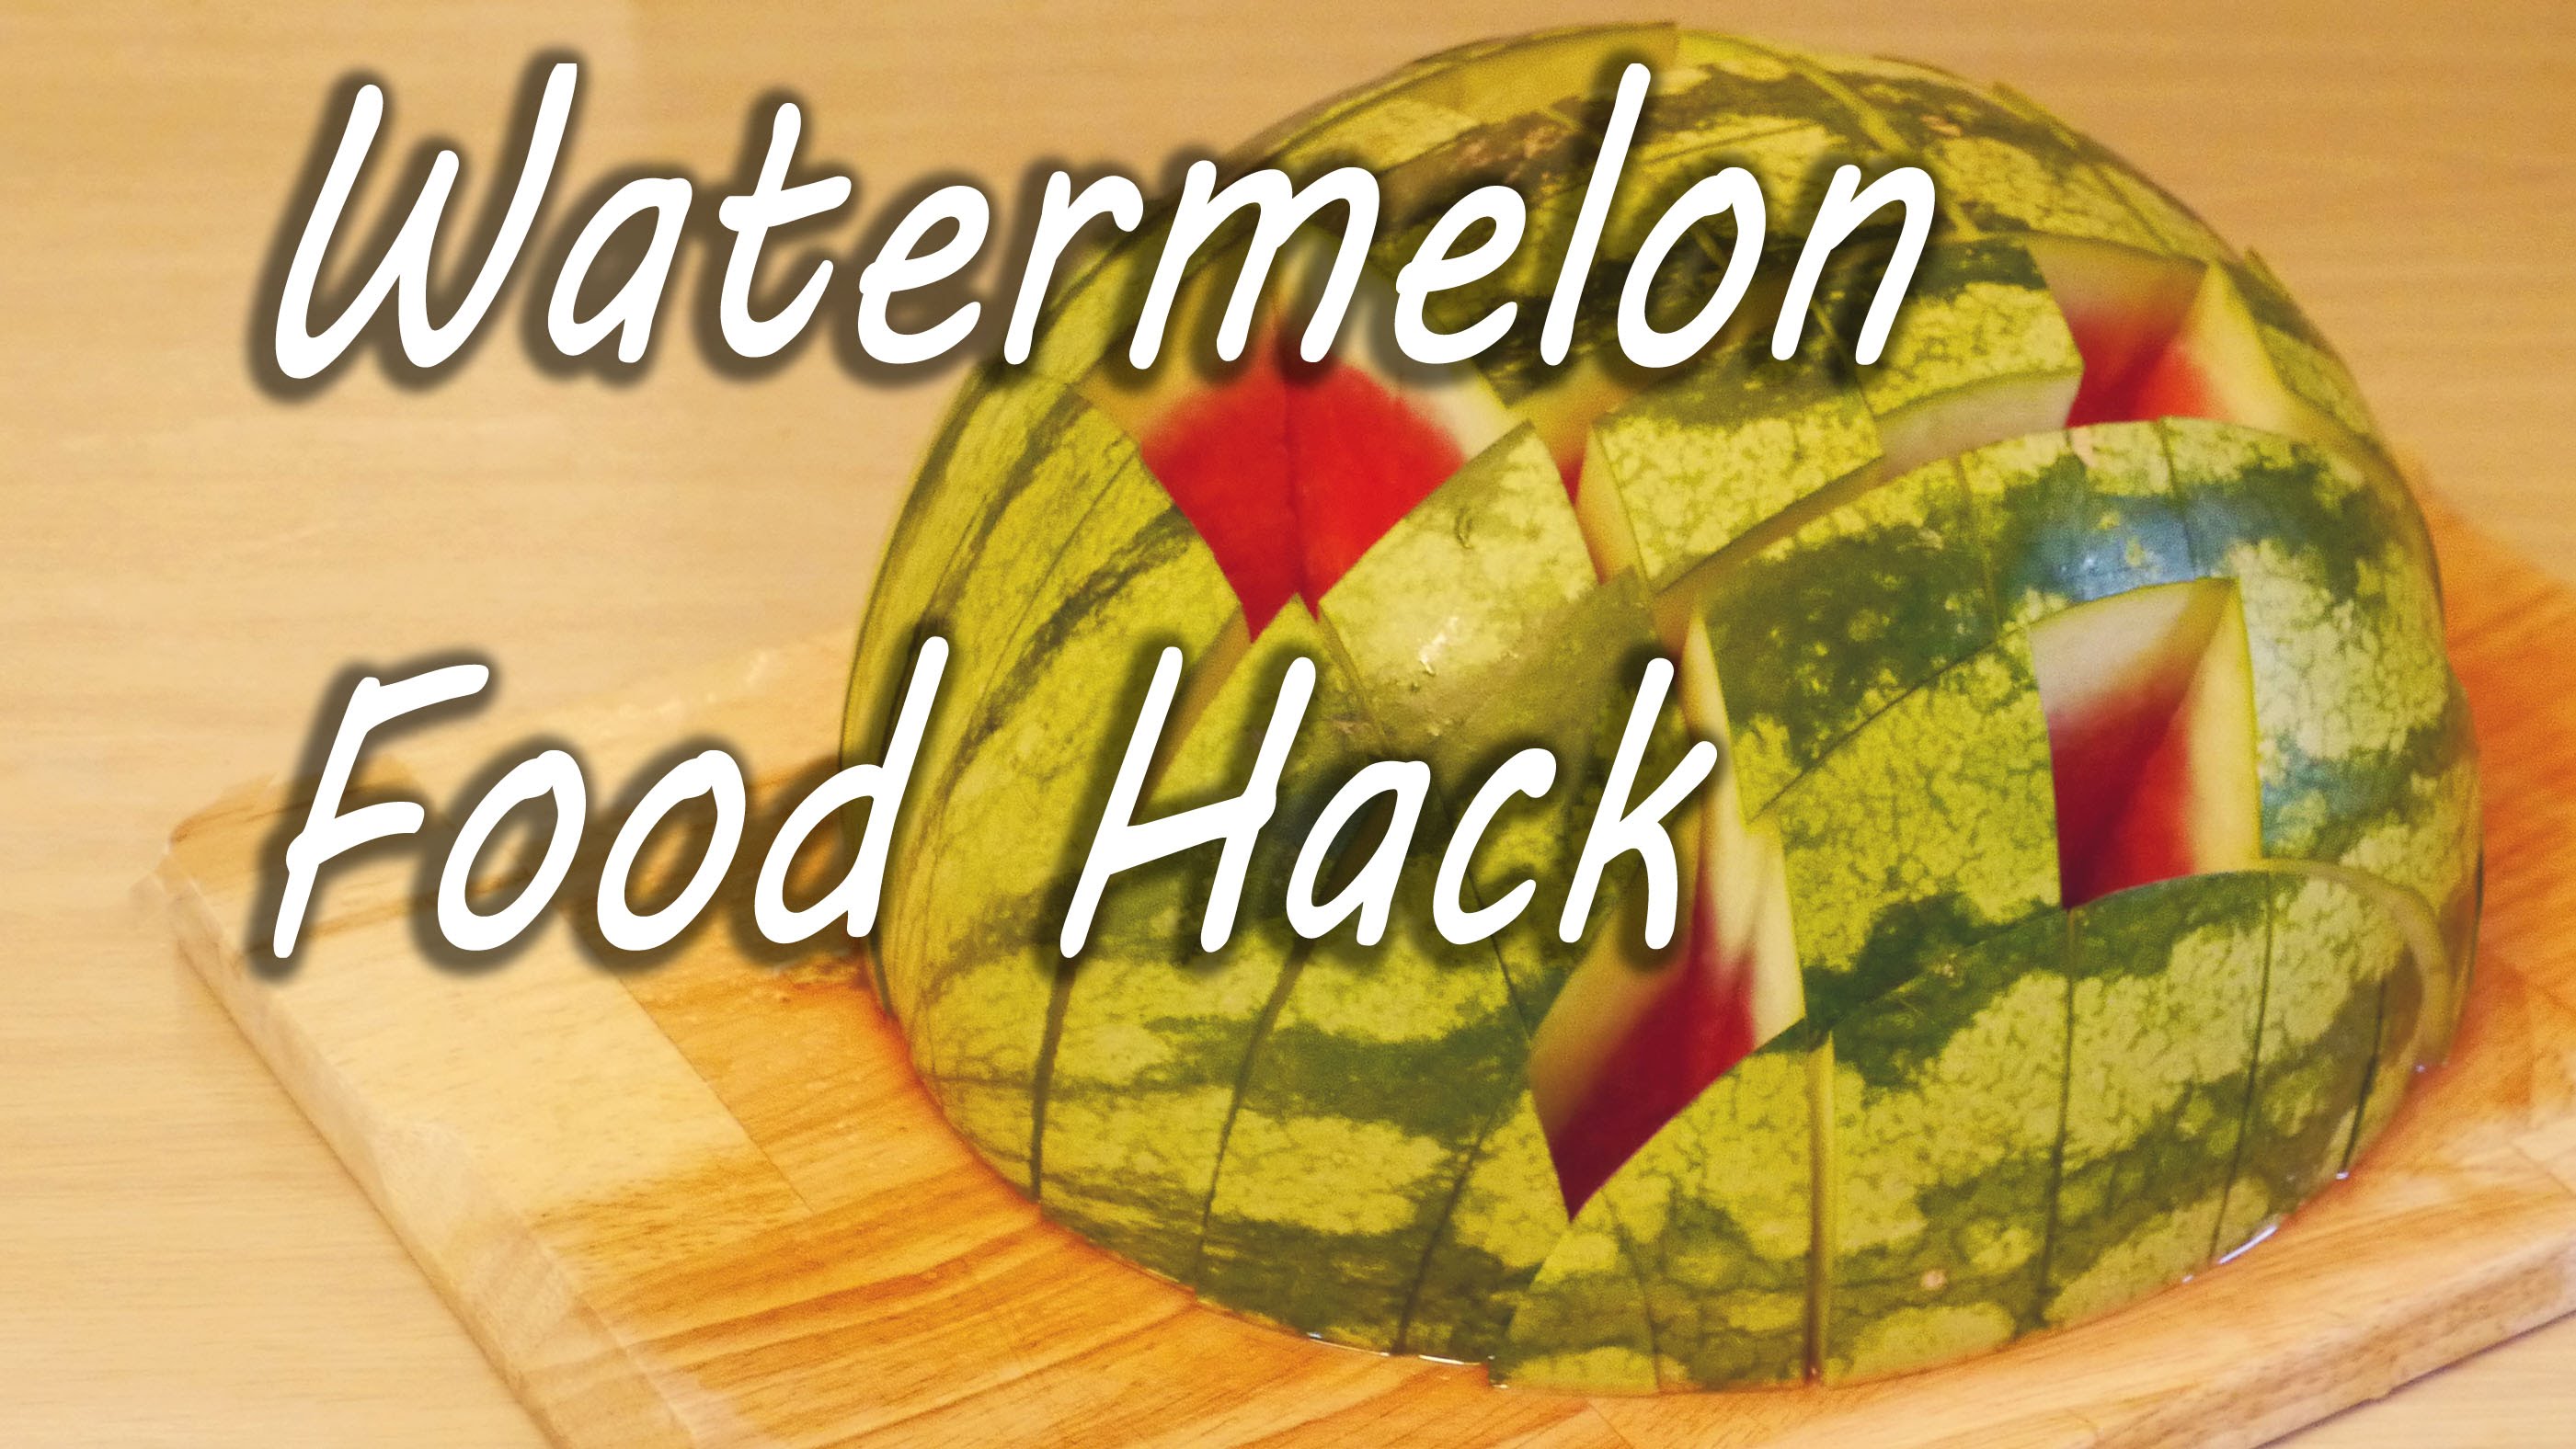 You’re Eating Watermelon Wrong